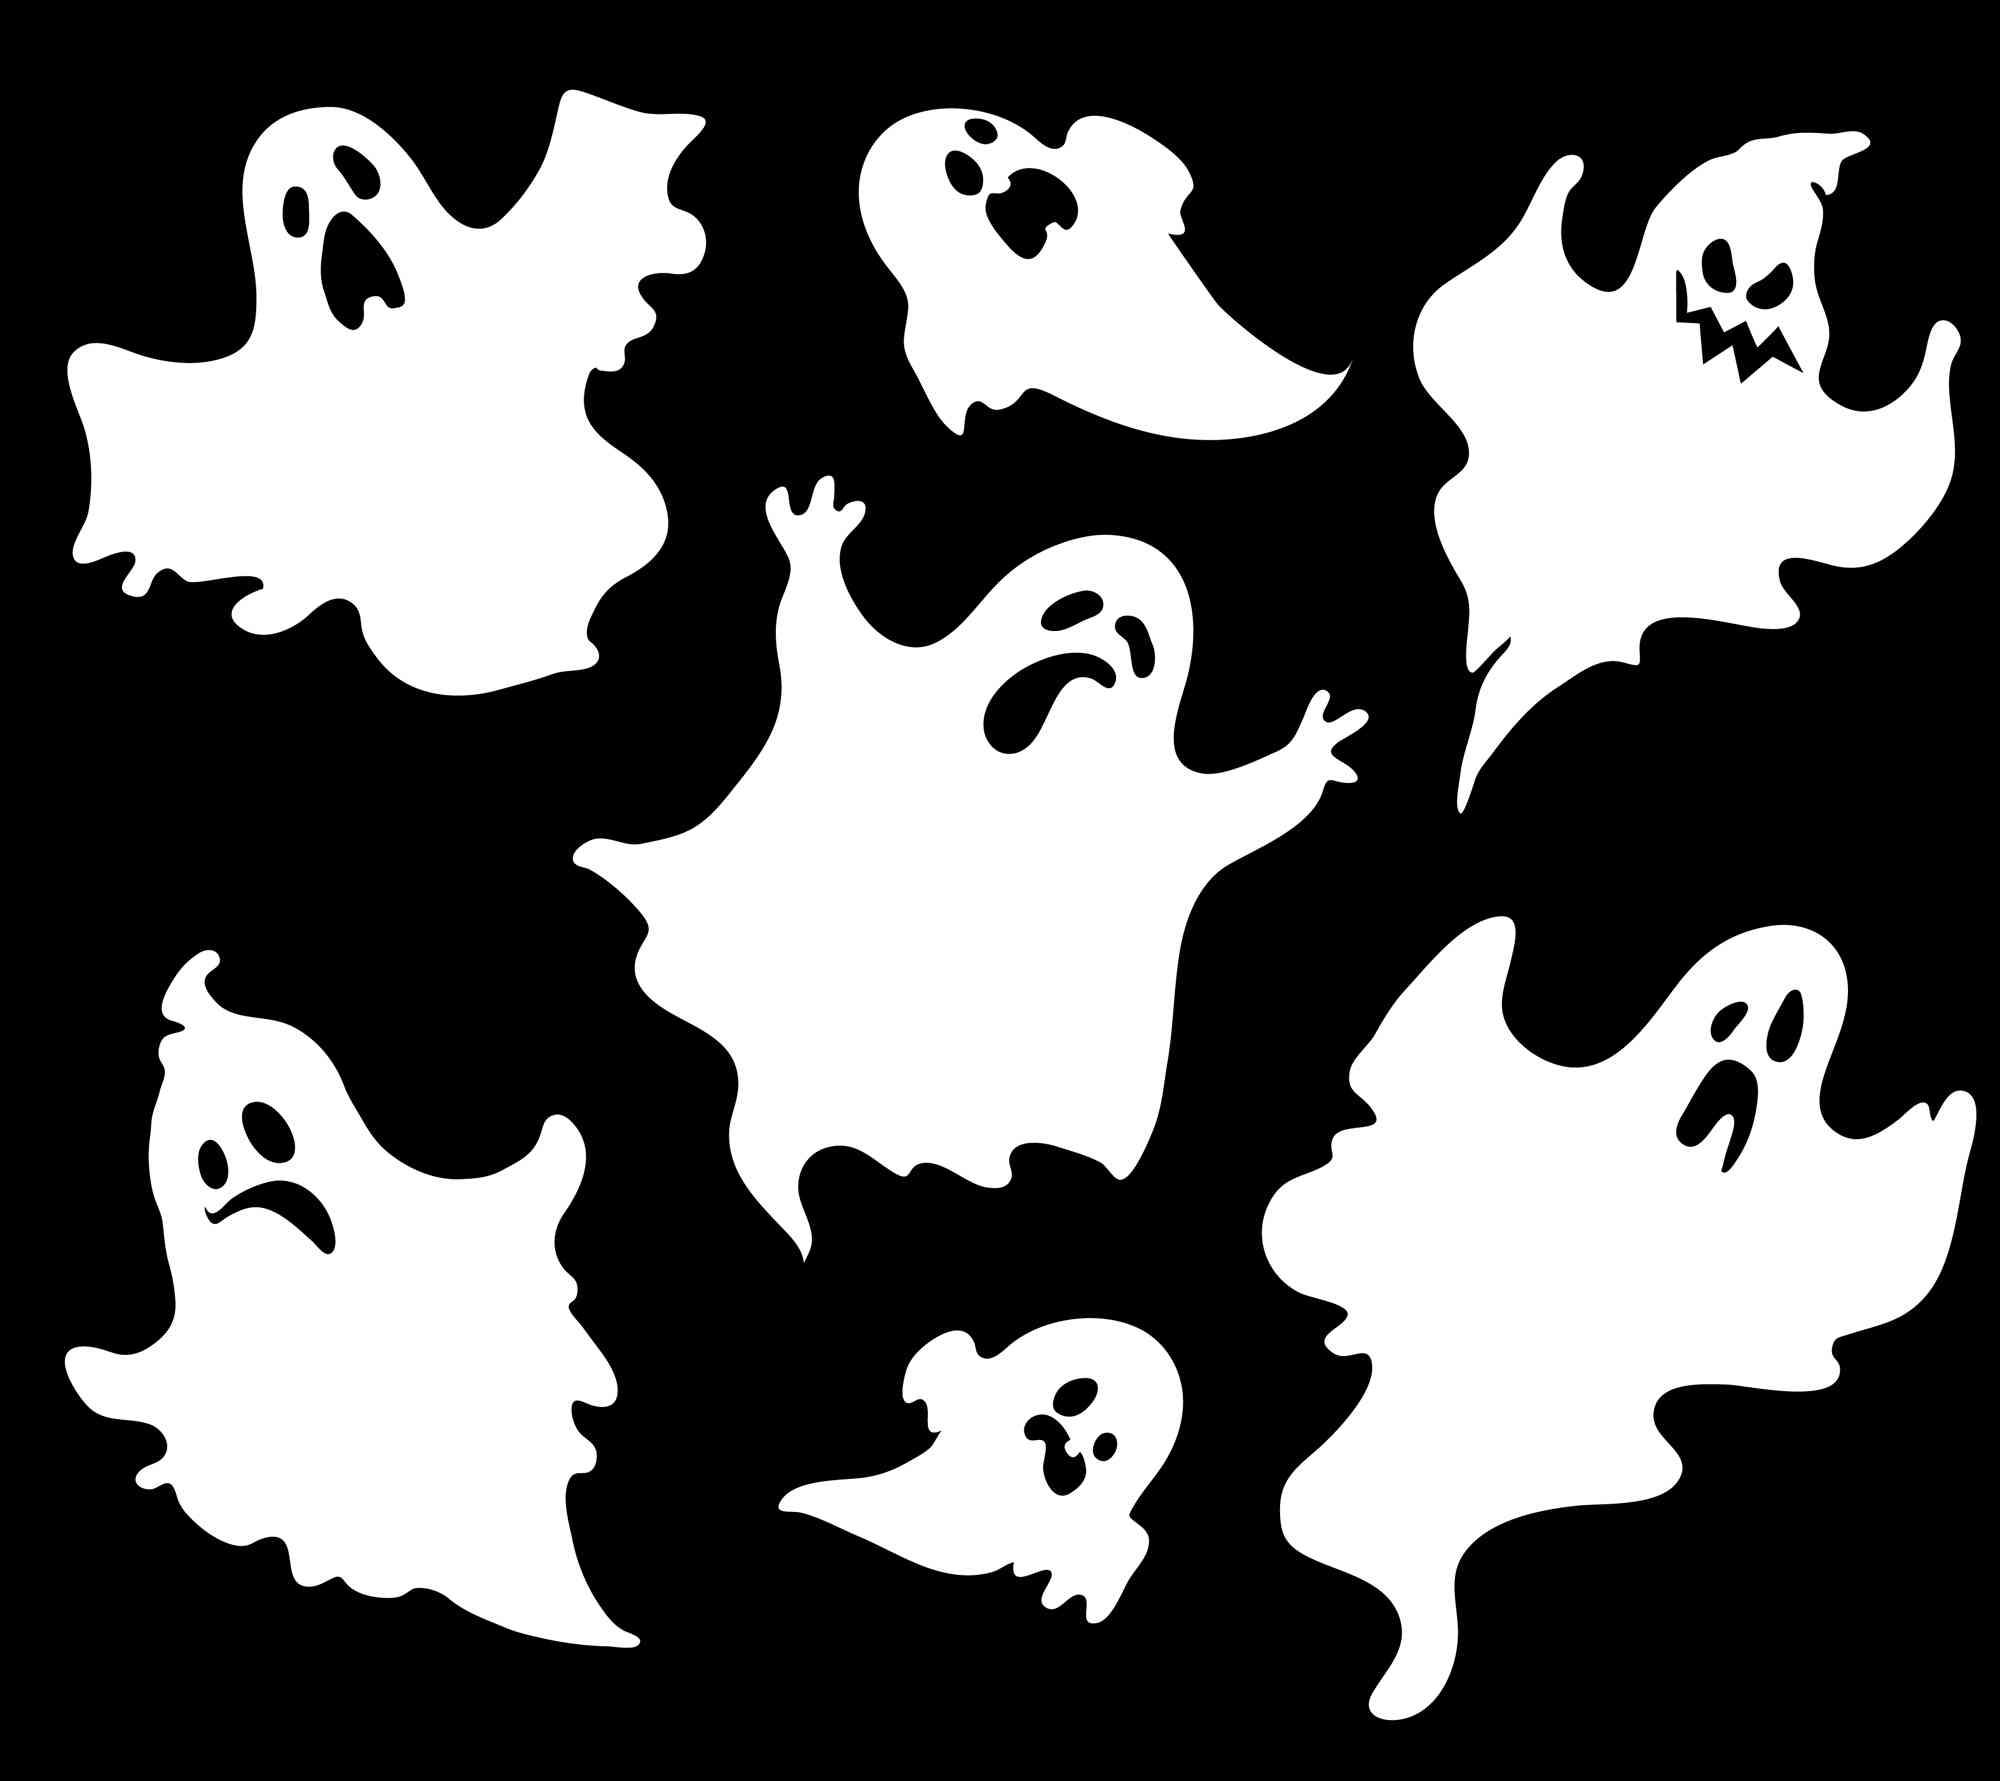 When Should You Ghost Someone?